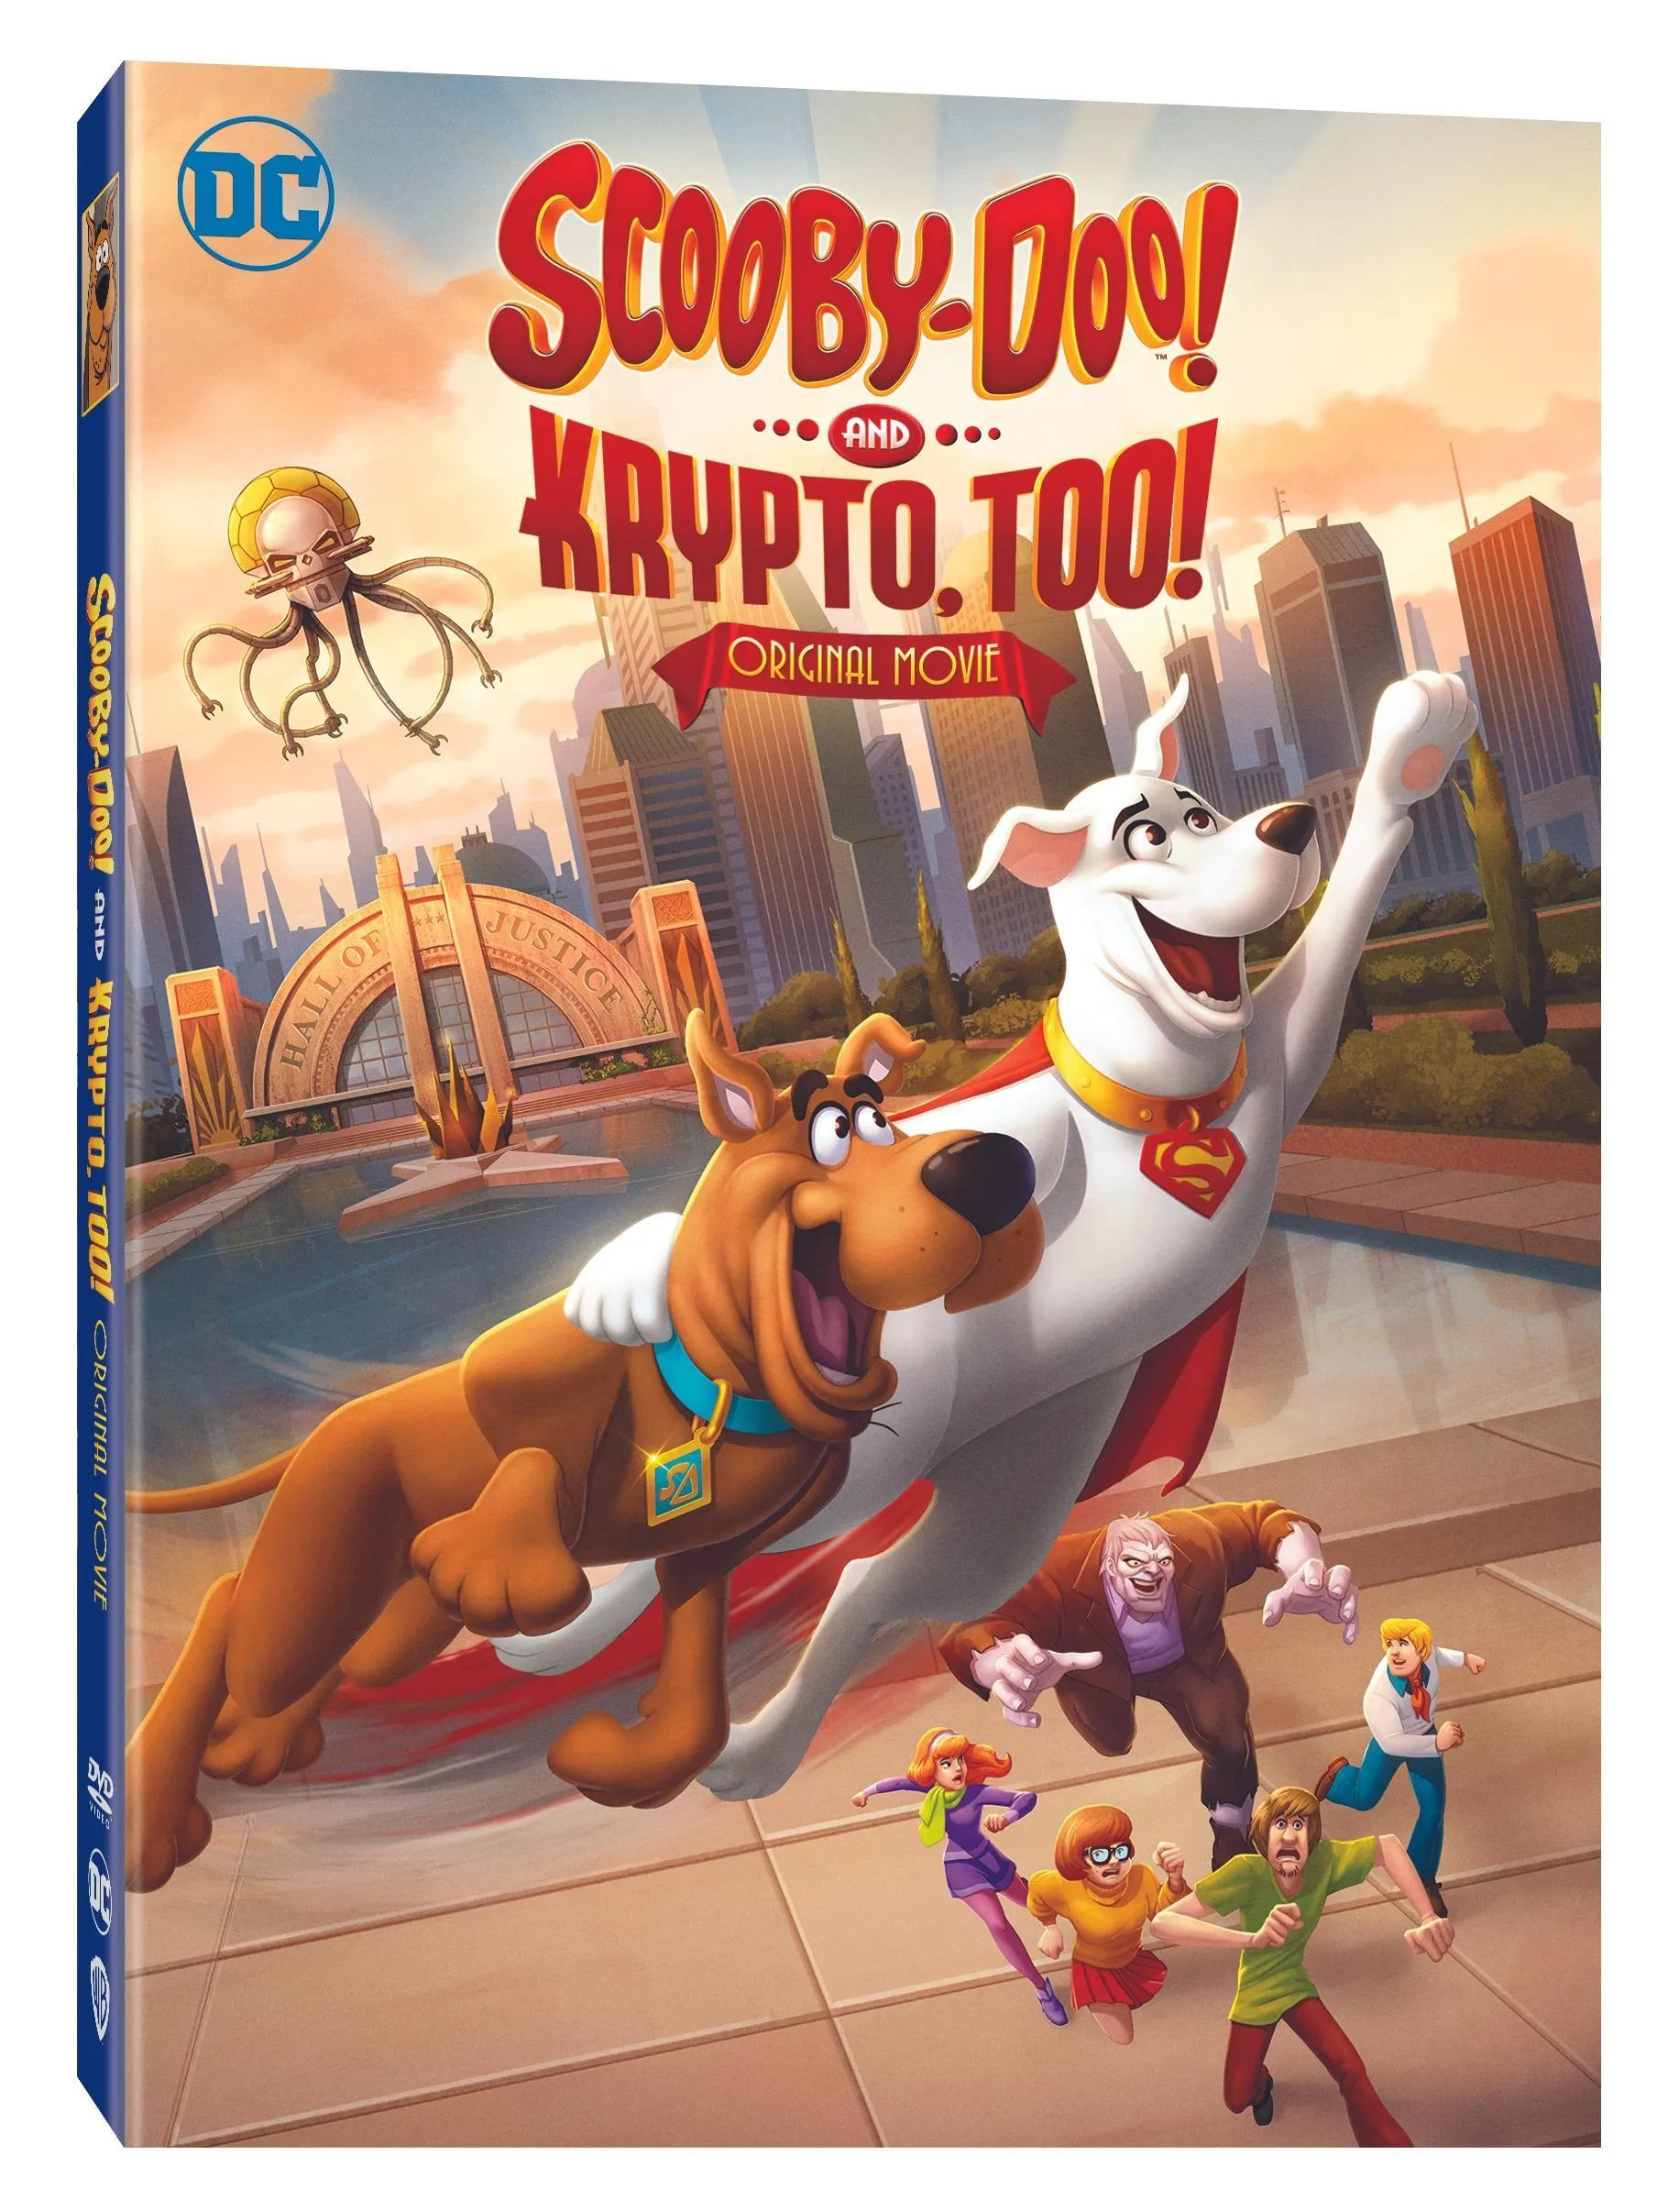 Warner Bros. Announces "ScoobyDoo! and Krypto, Too!" Animated Movie